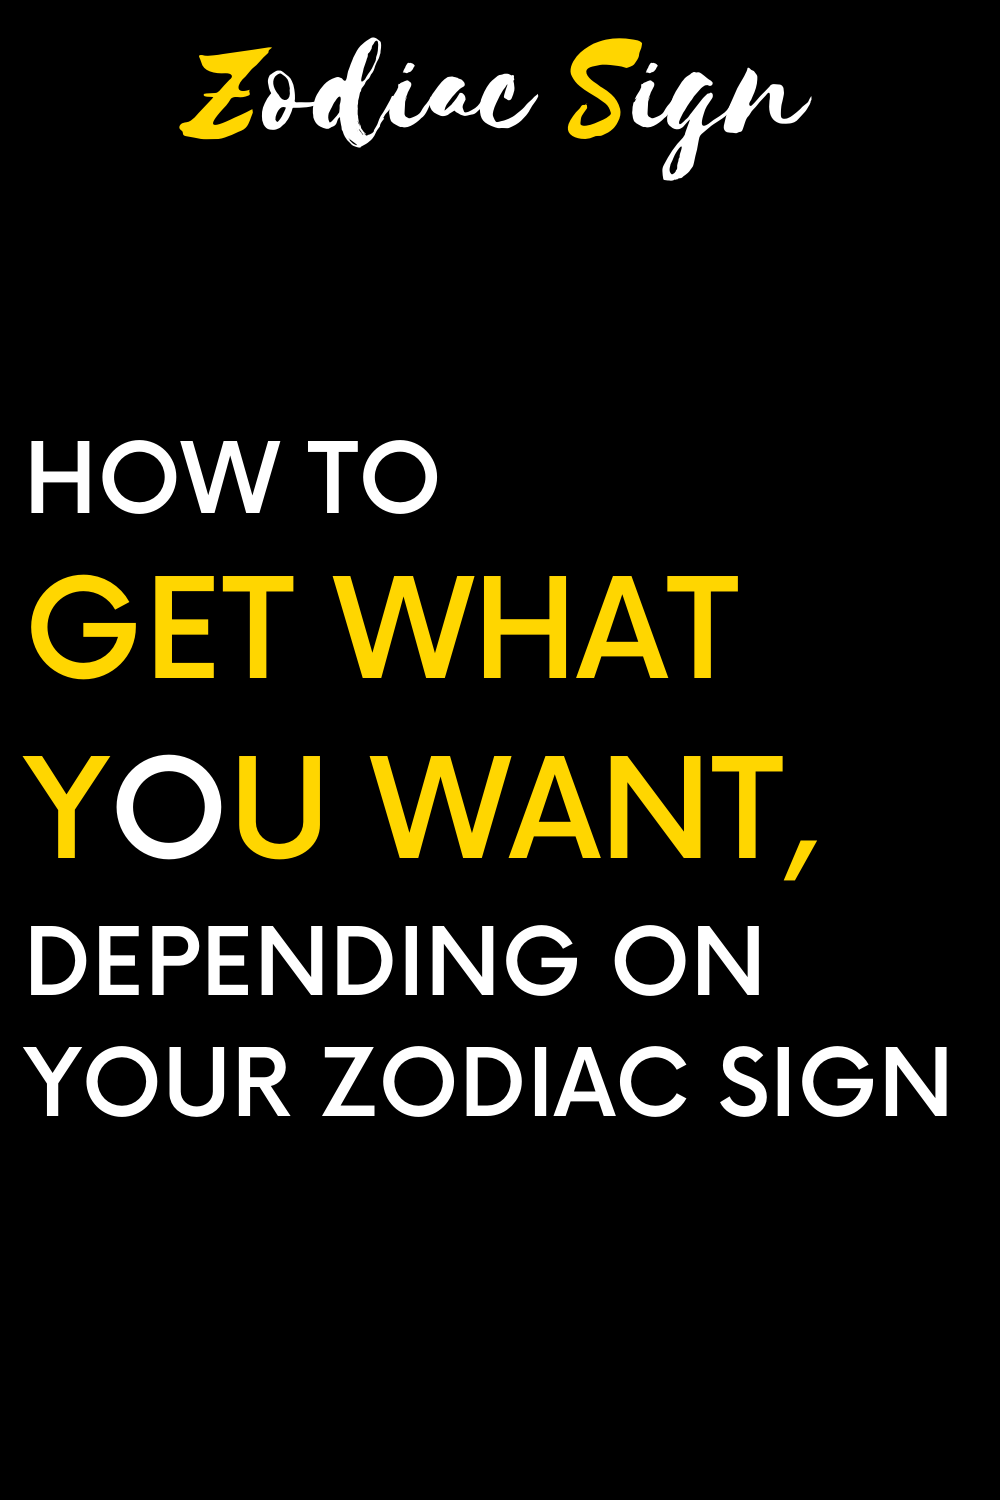 How to get what you want, depending on your zodiac sign